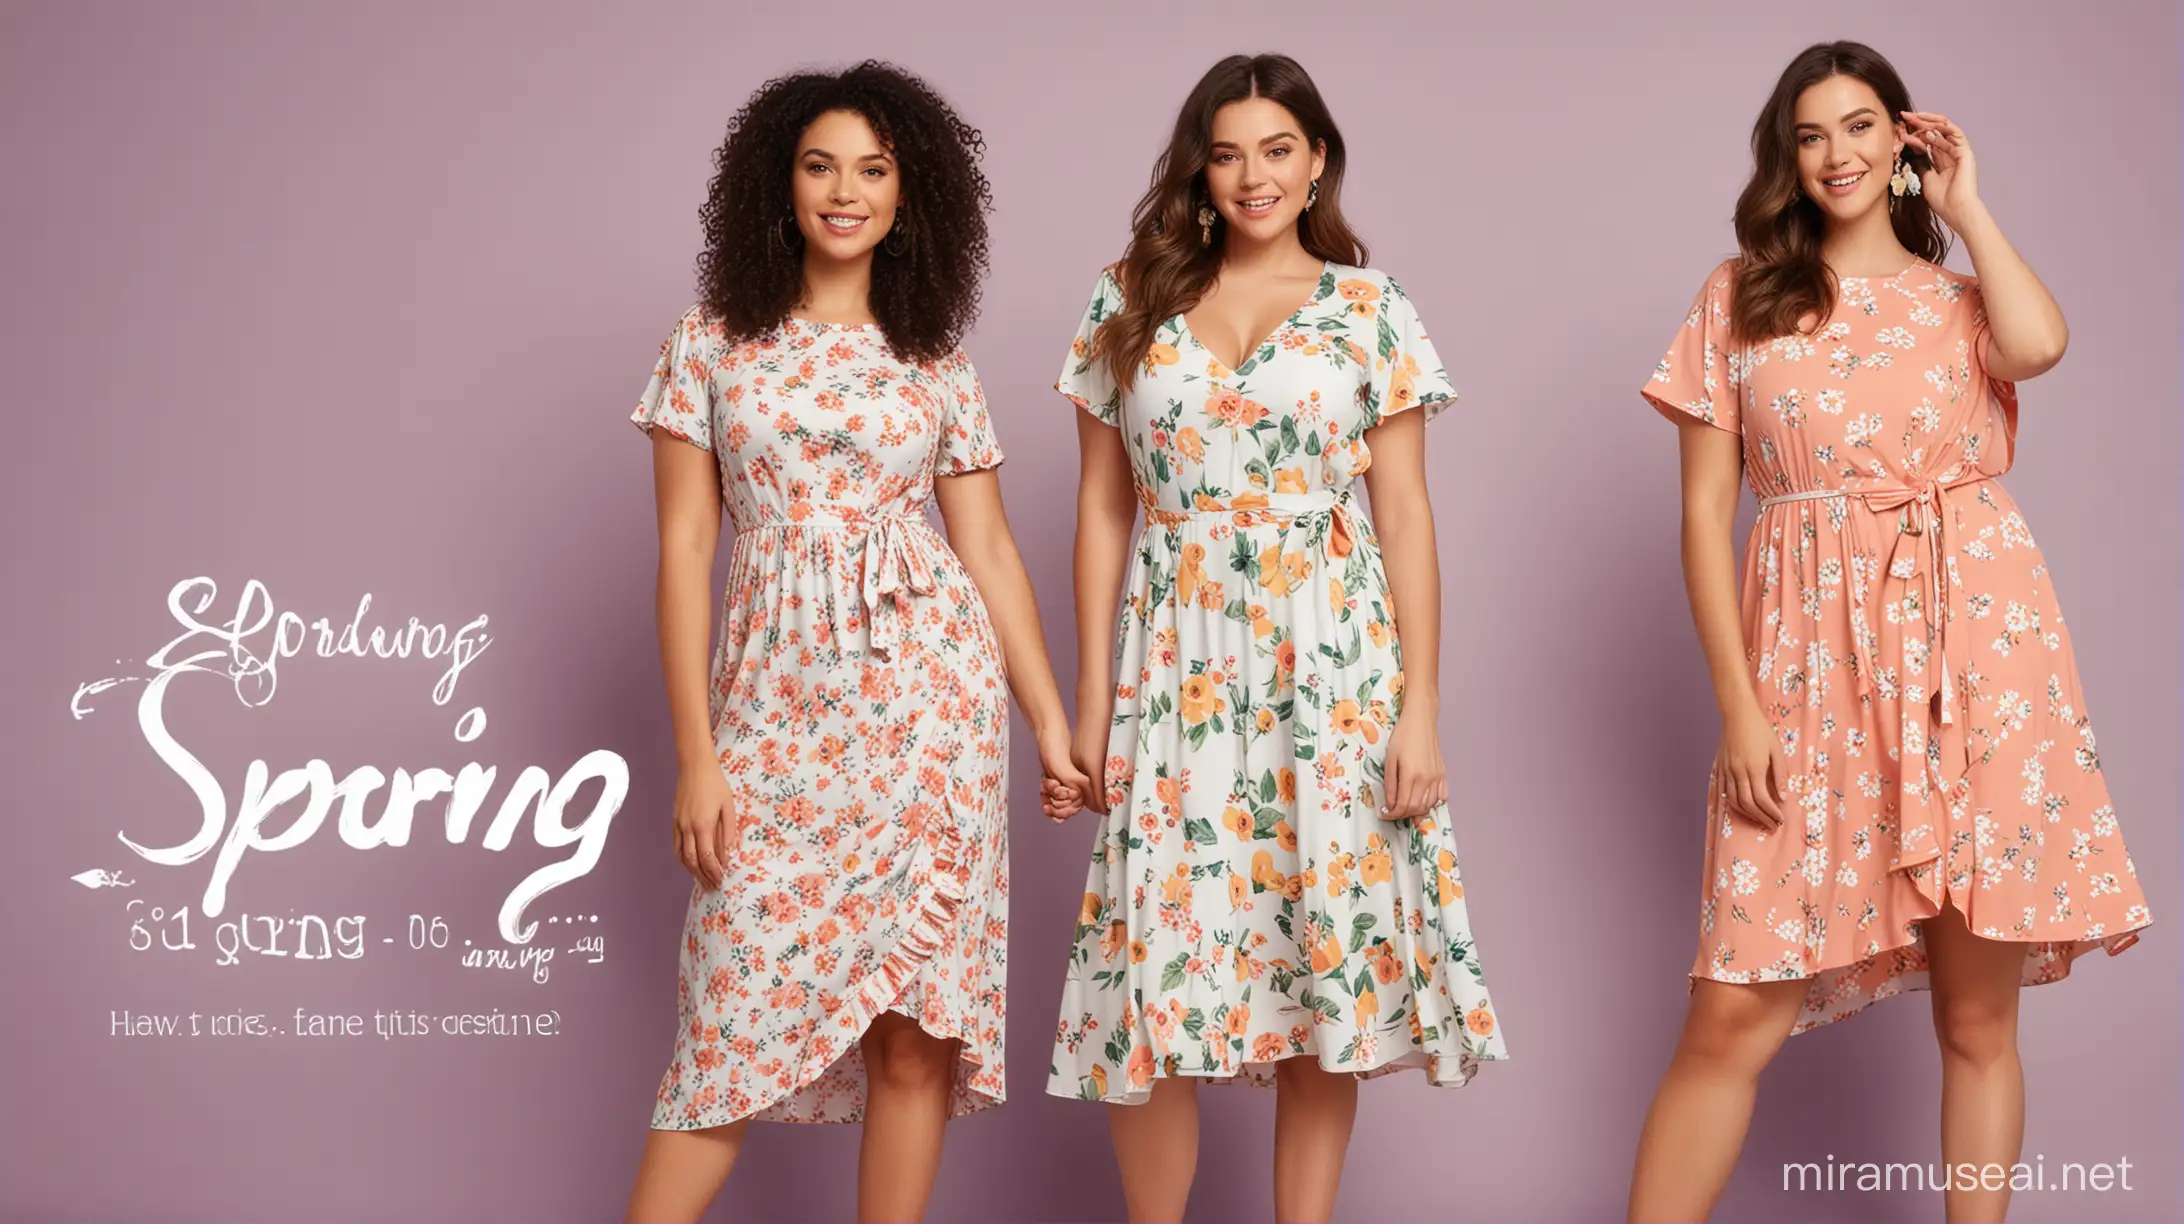 Curve women in short sleeve dresses, banner for website with slogan "Spring time"